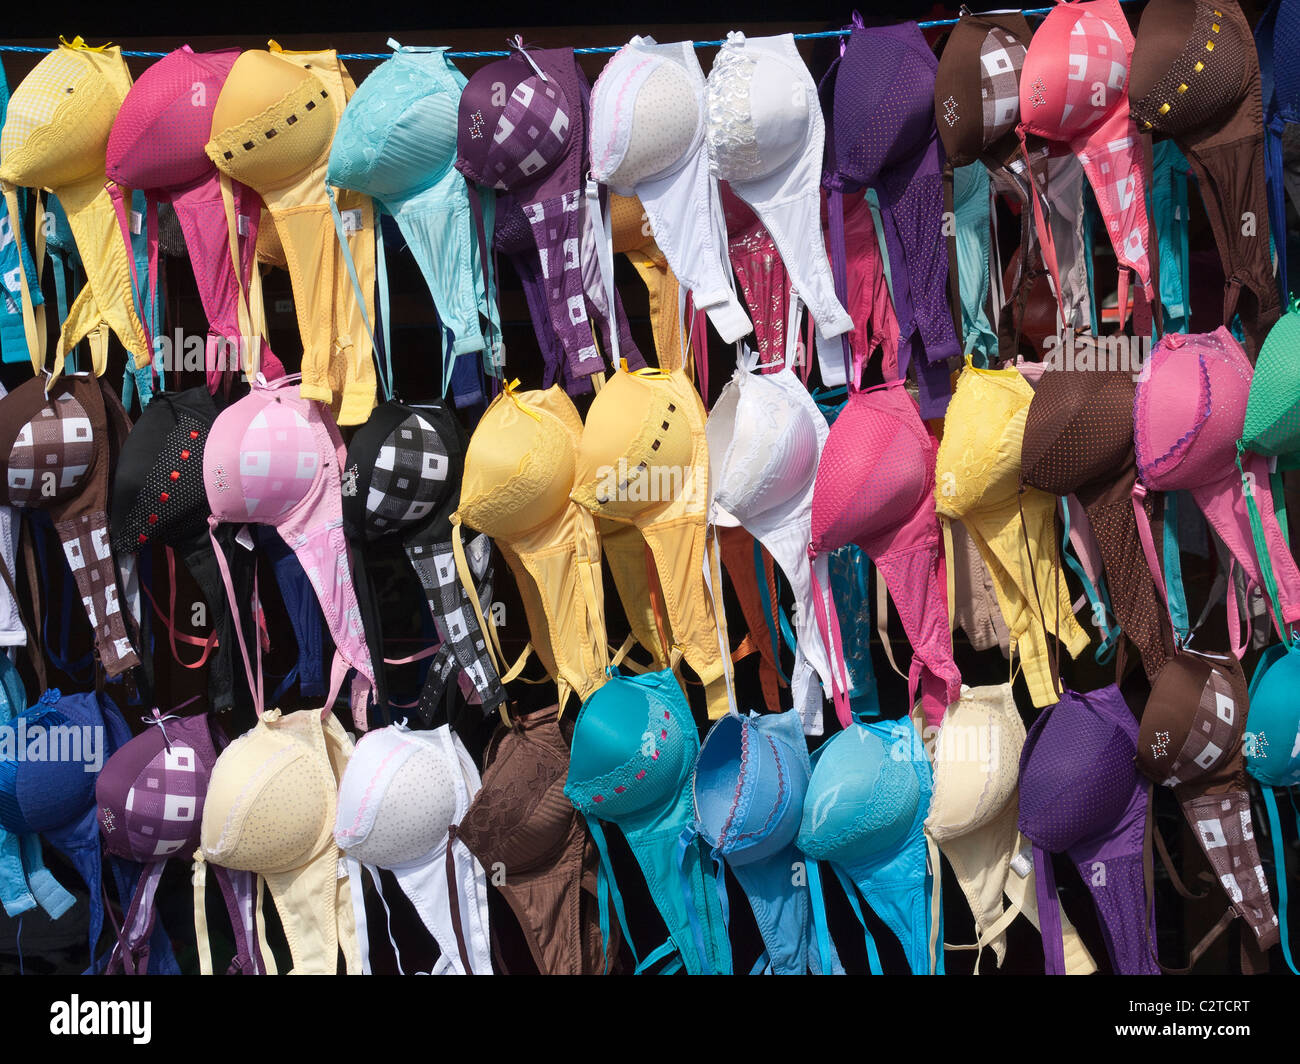 https://c8.alamy.com/comp/C2TCRT/a-public-market-vendors-stall-displays-the-repeated-forms-of-colorful-C2TCRT.jpg